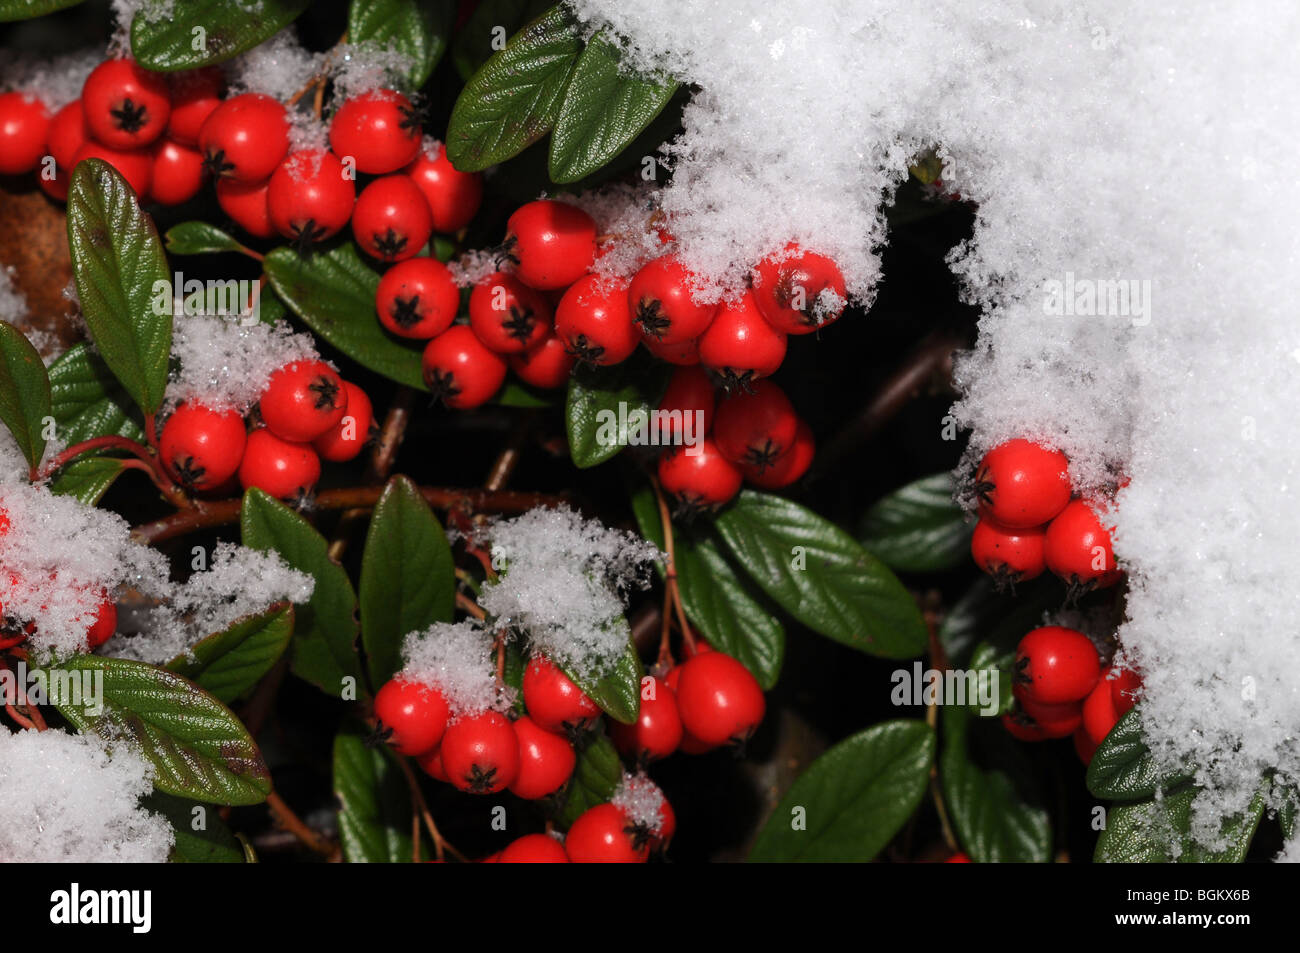 close up photograph of cotoneaster berries in the snow Stock Photo